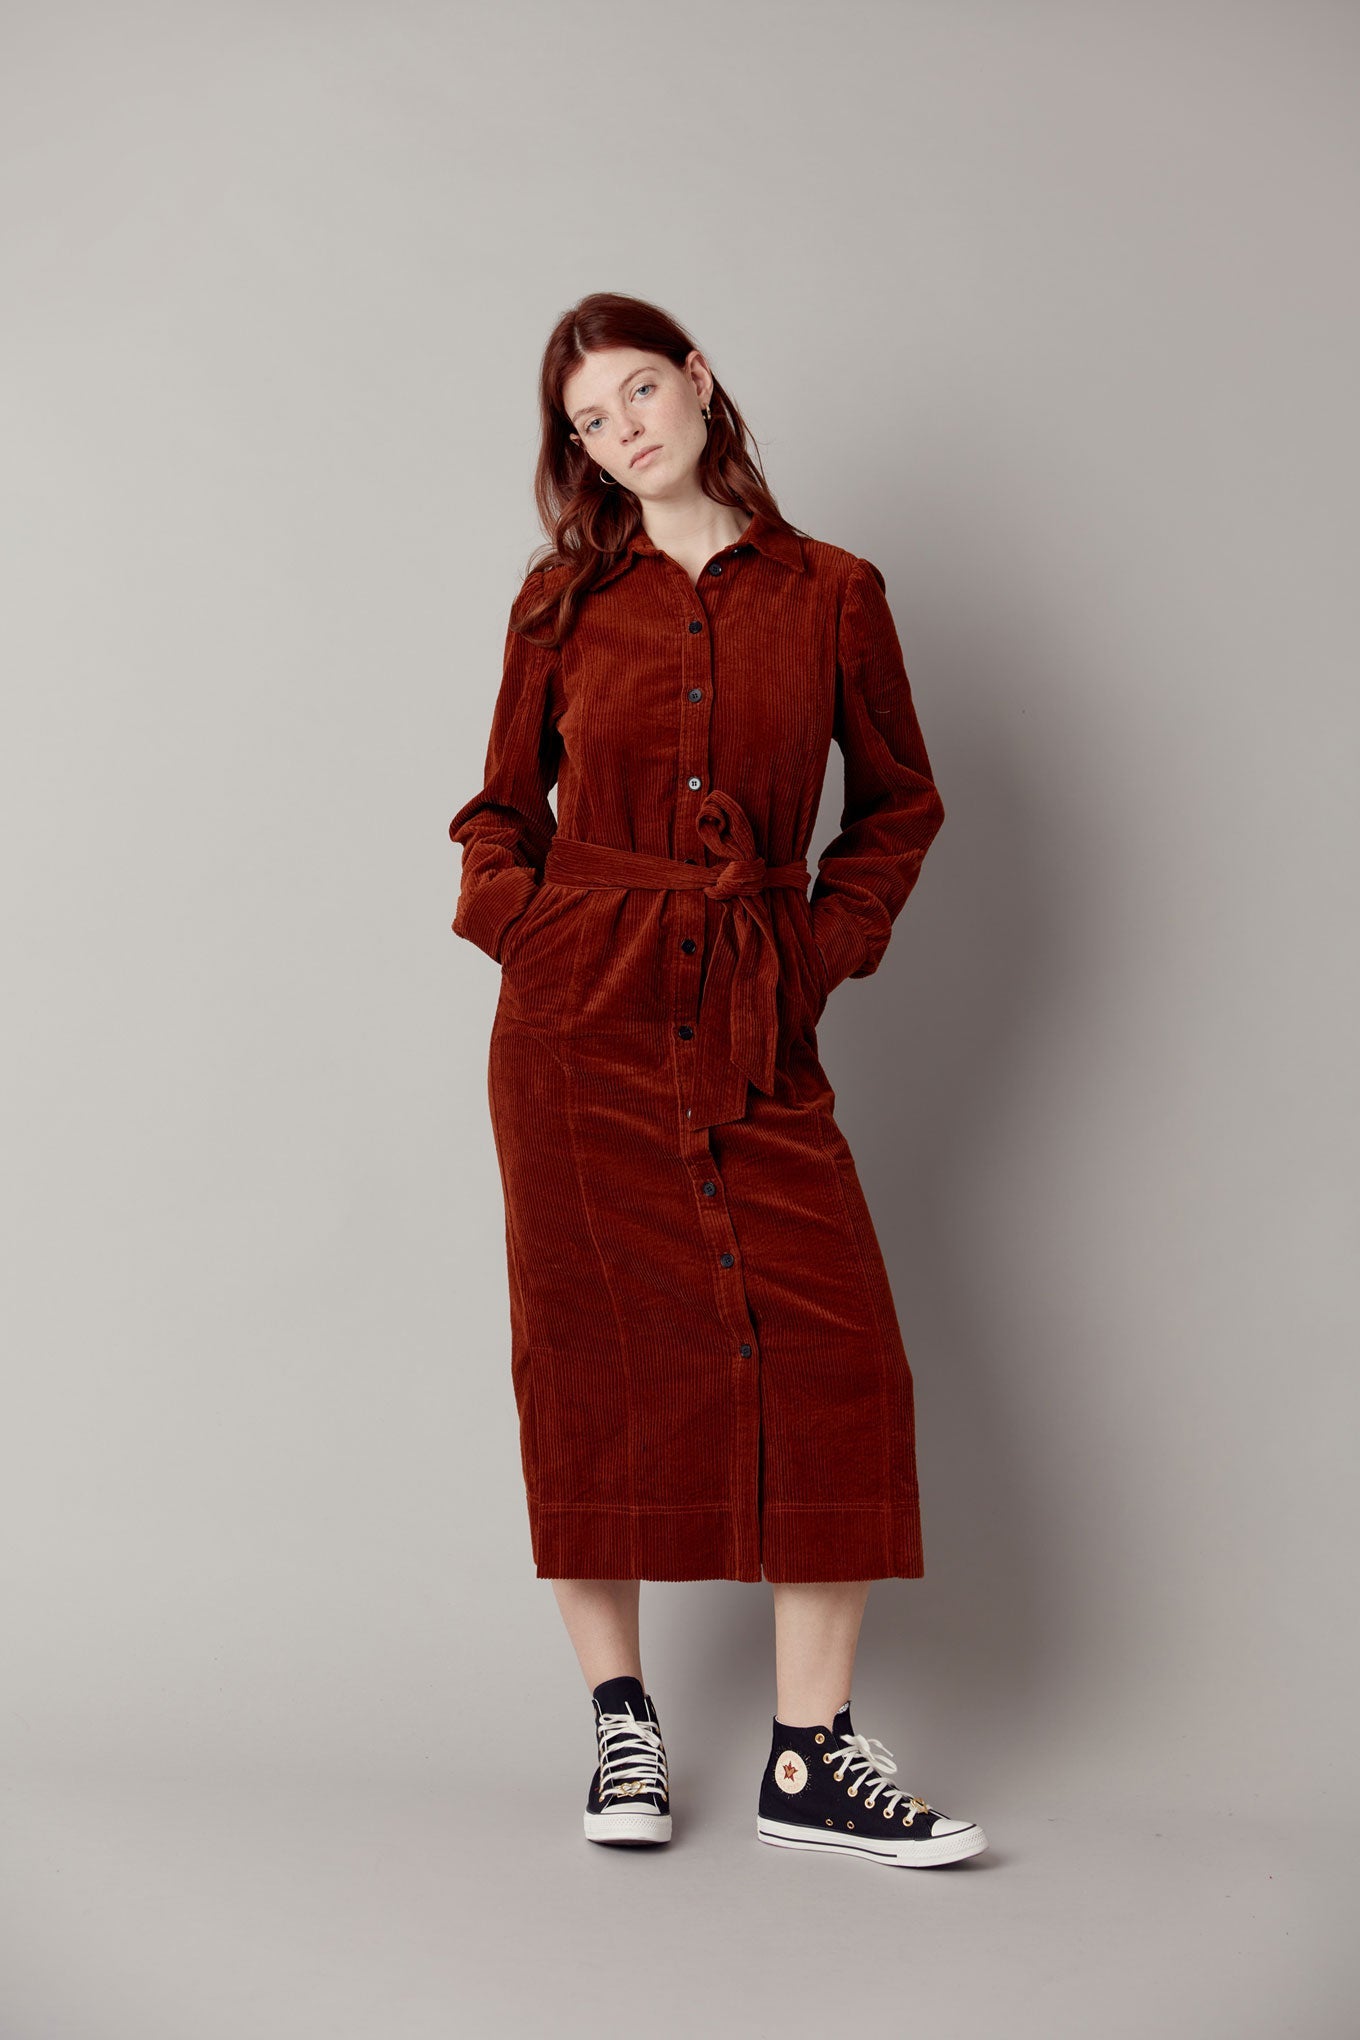 Red-brown, long corduroy dress REINA made from 100% organic cotton by Komodo